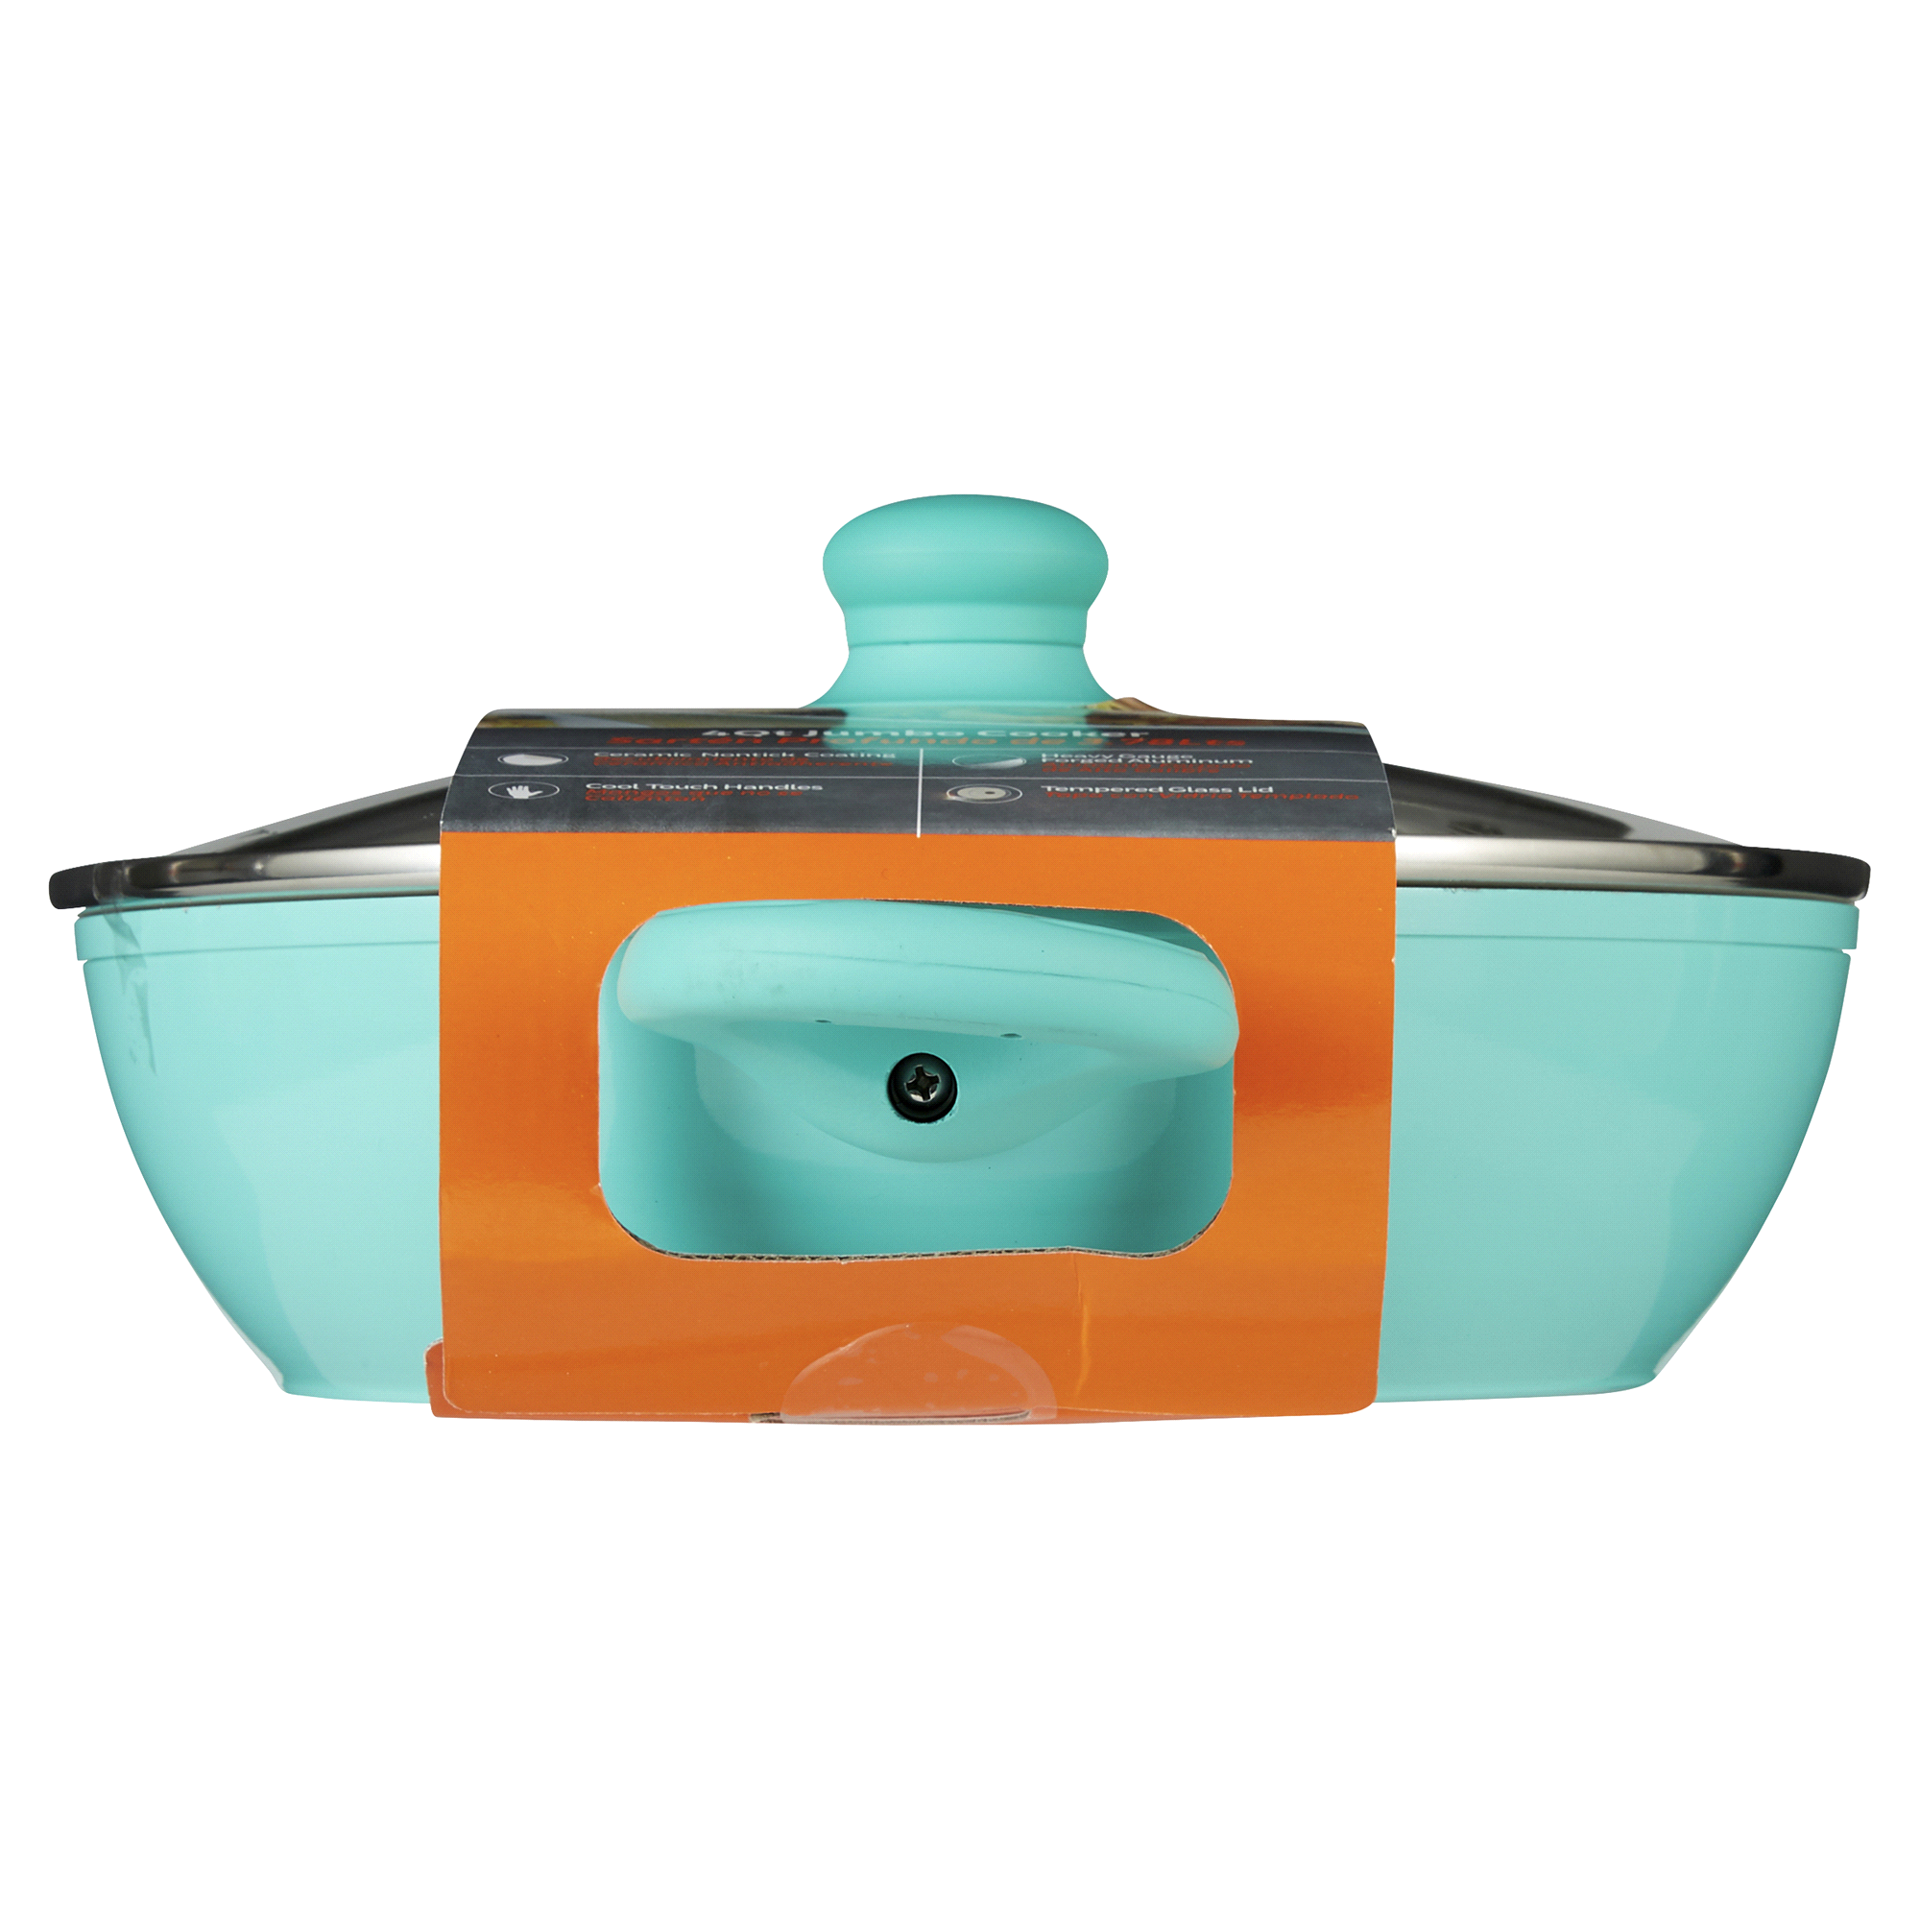 slide 2 of 29, IMUSA USA IMU-30053 Forged Teal Jumbo Cooker with Ceramic Nonstick, 4 qt